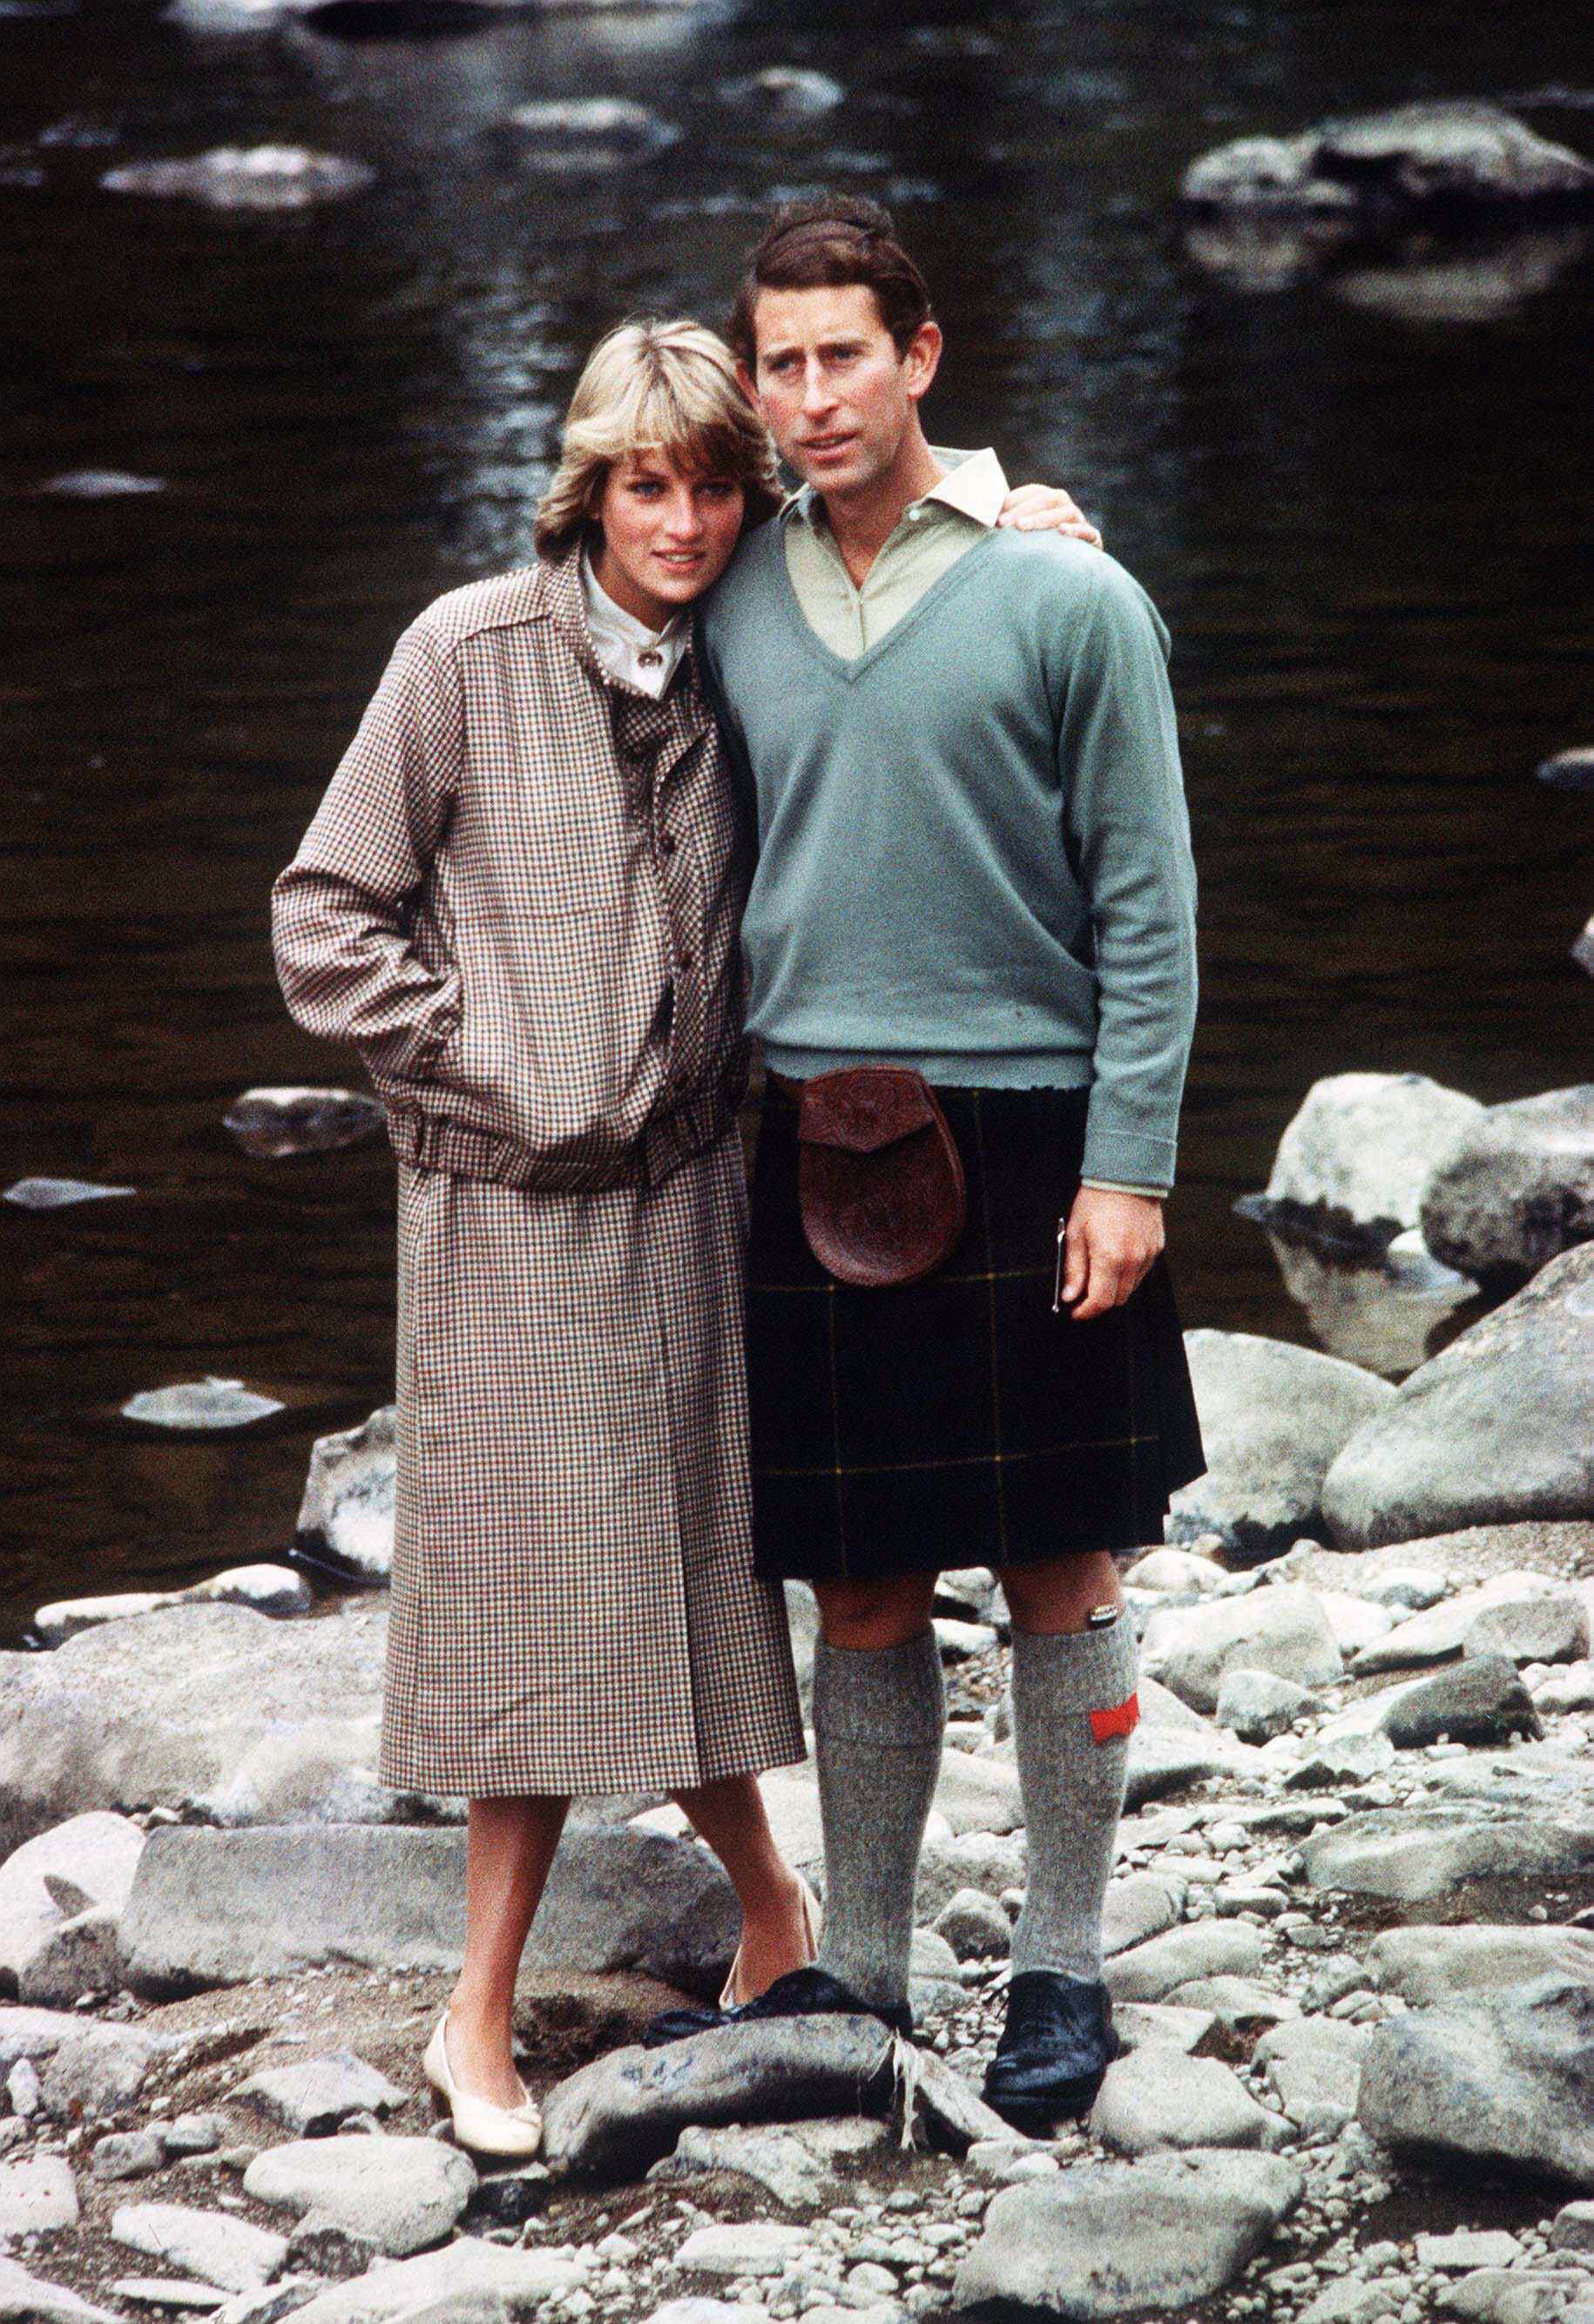 Prince Charles and Princess Diana pose for a photo on the banks of the river Dee in the grounds of Balmoral Castle during their honeymoon on August 19, 1981, in Balmoral, Scotland. | Source: Getty Images.